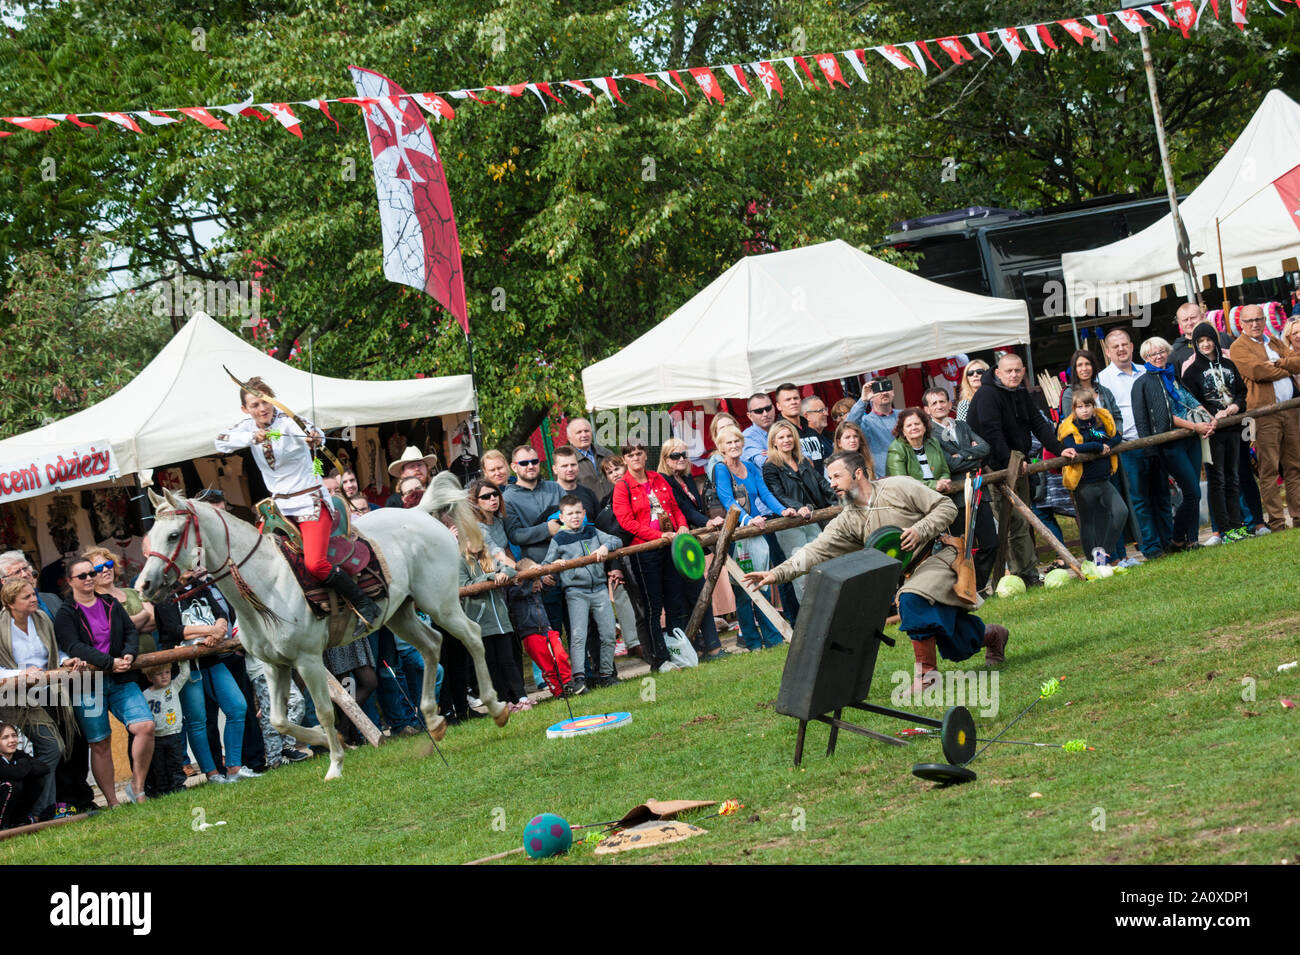 Live demonstration of equine archery by both sexes during a festival of historical combat at the Pultusk Castle in central Poland. Stock Photo